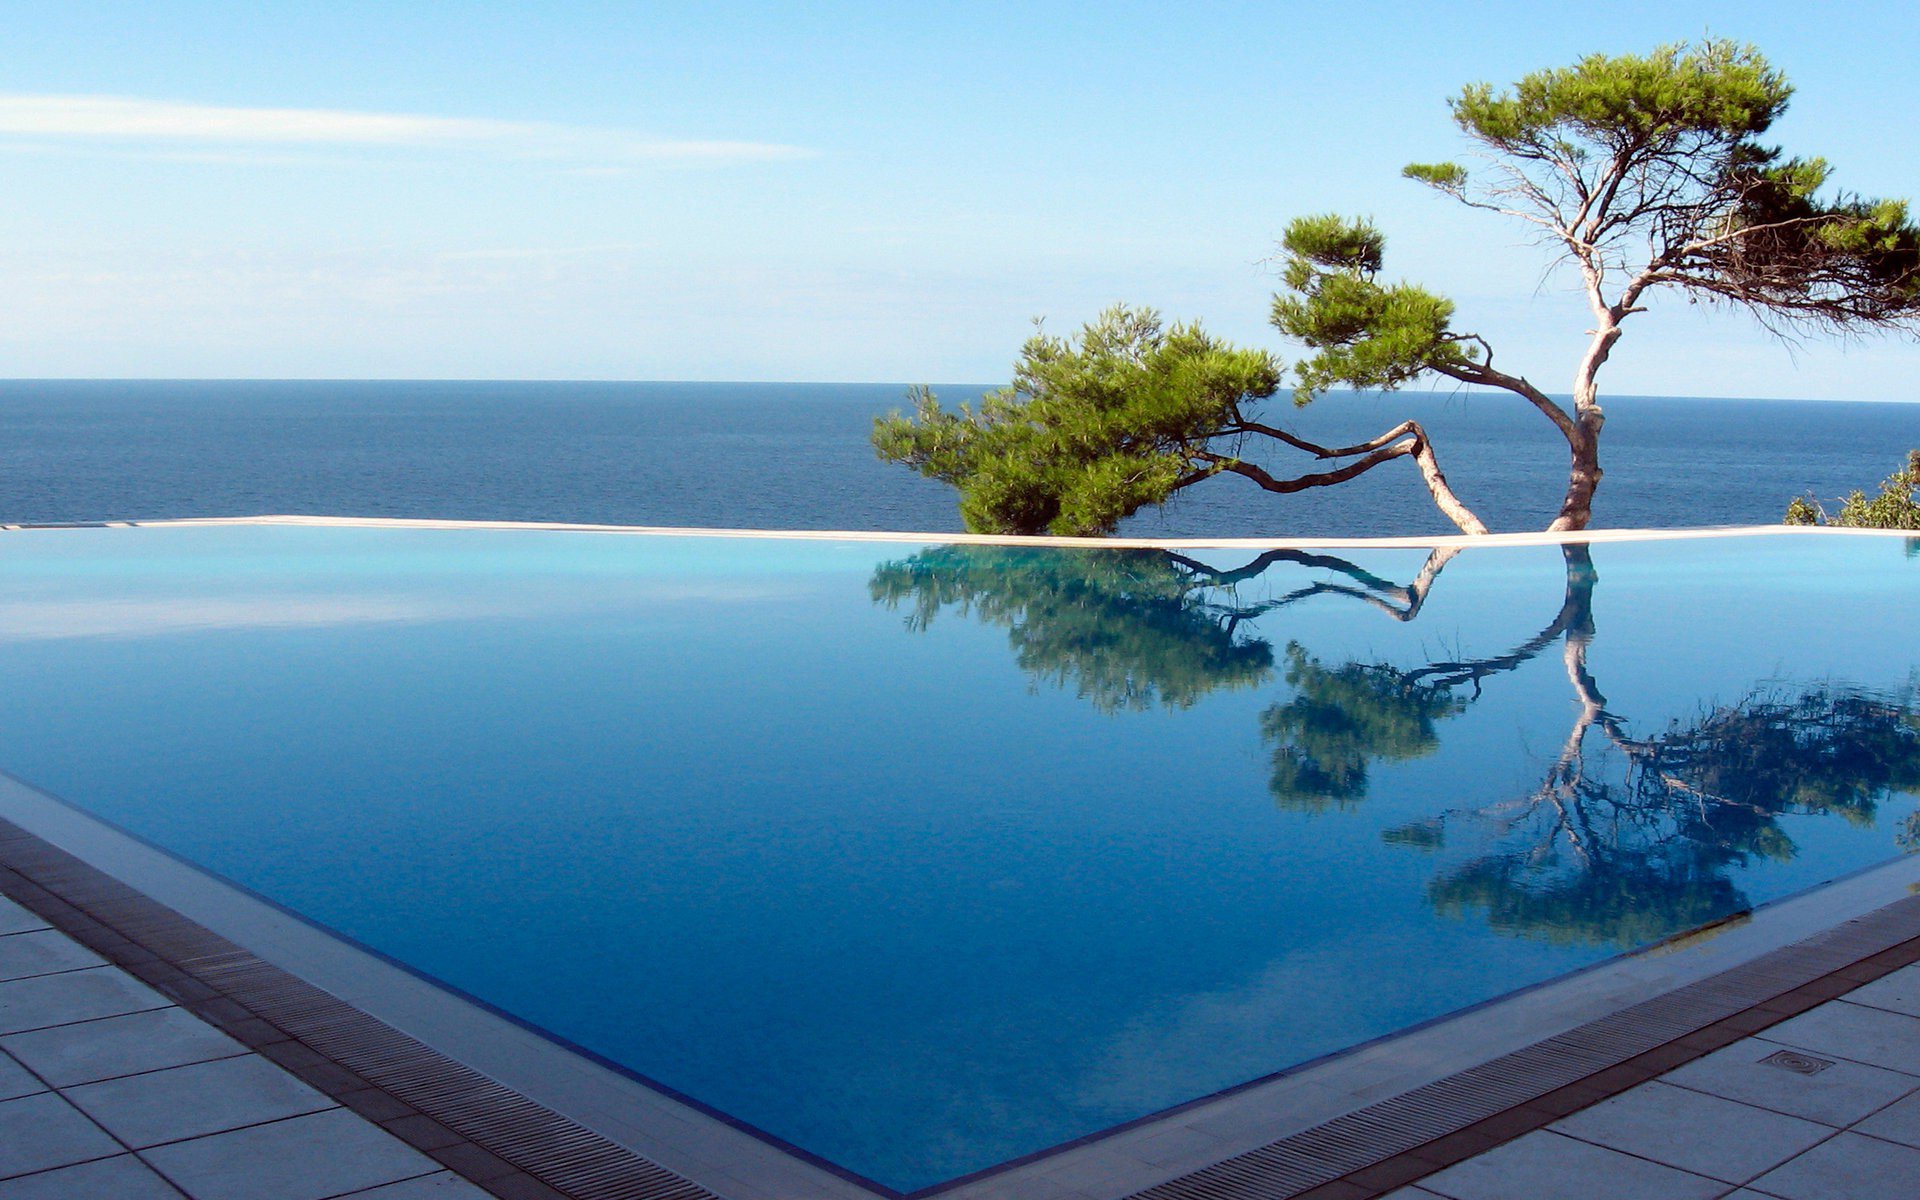 Infinity Pool, A Swimming Pool That Has No Limits ...